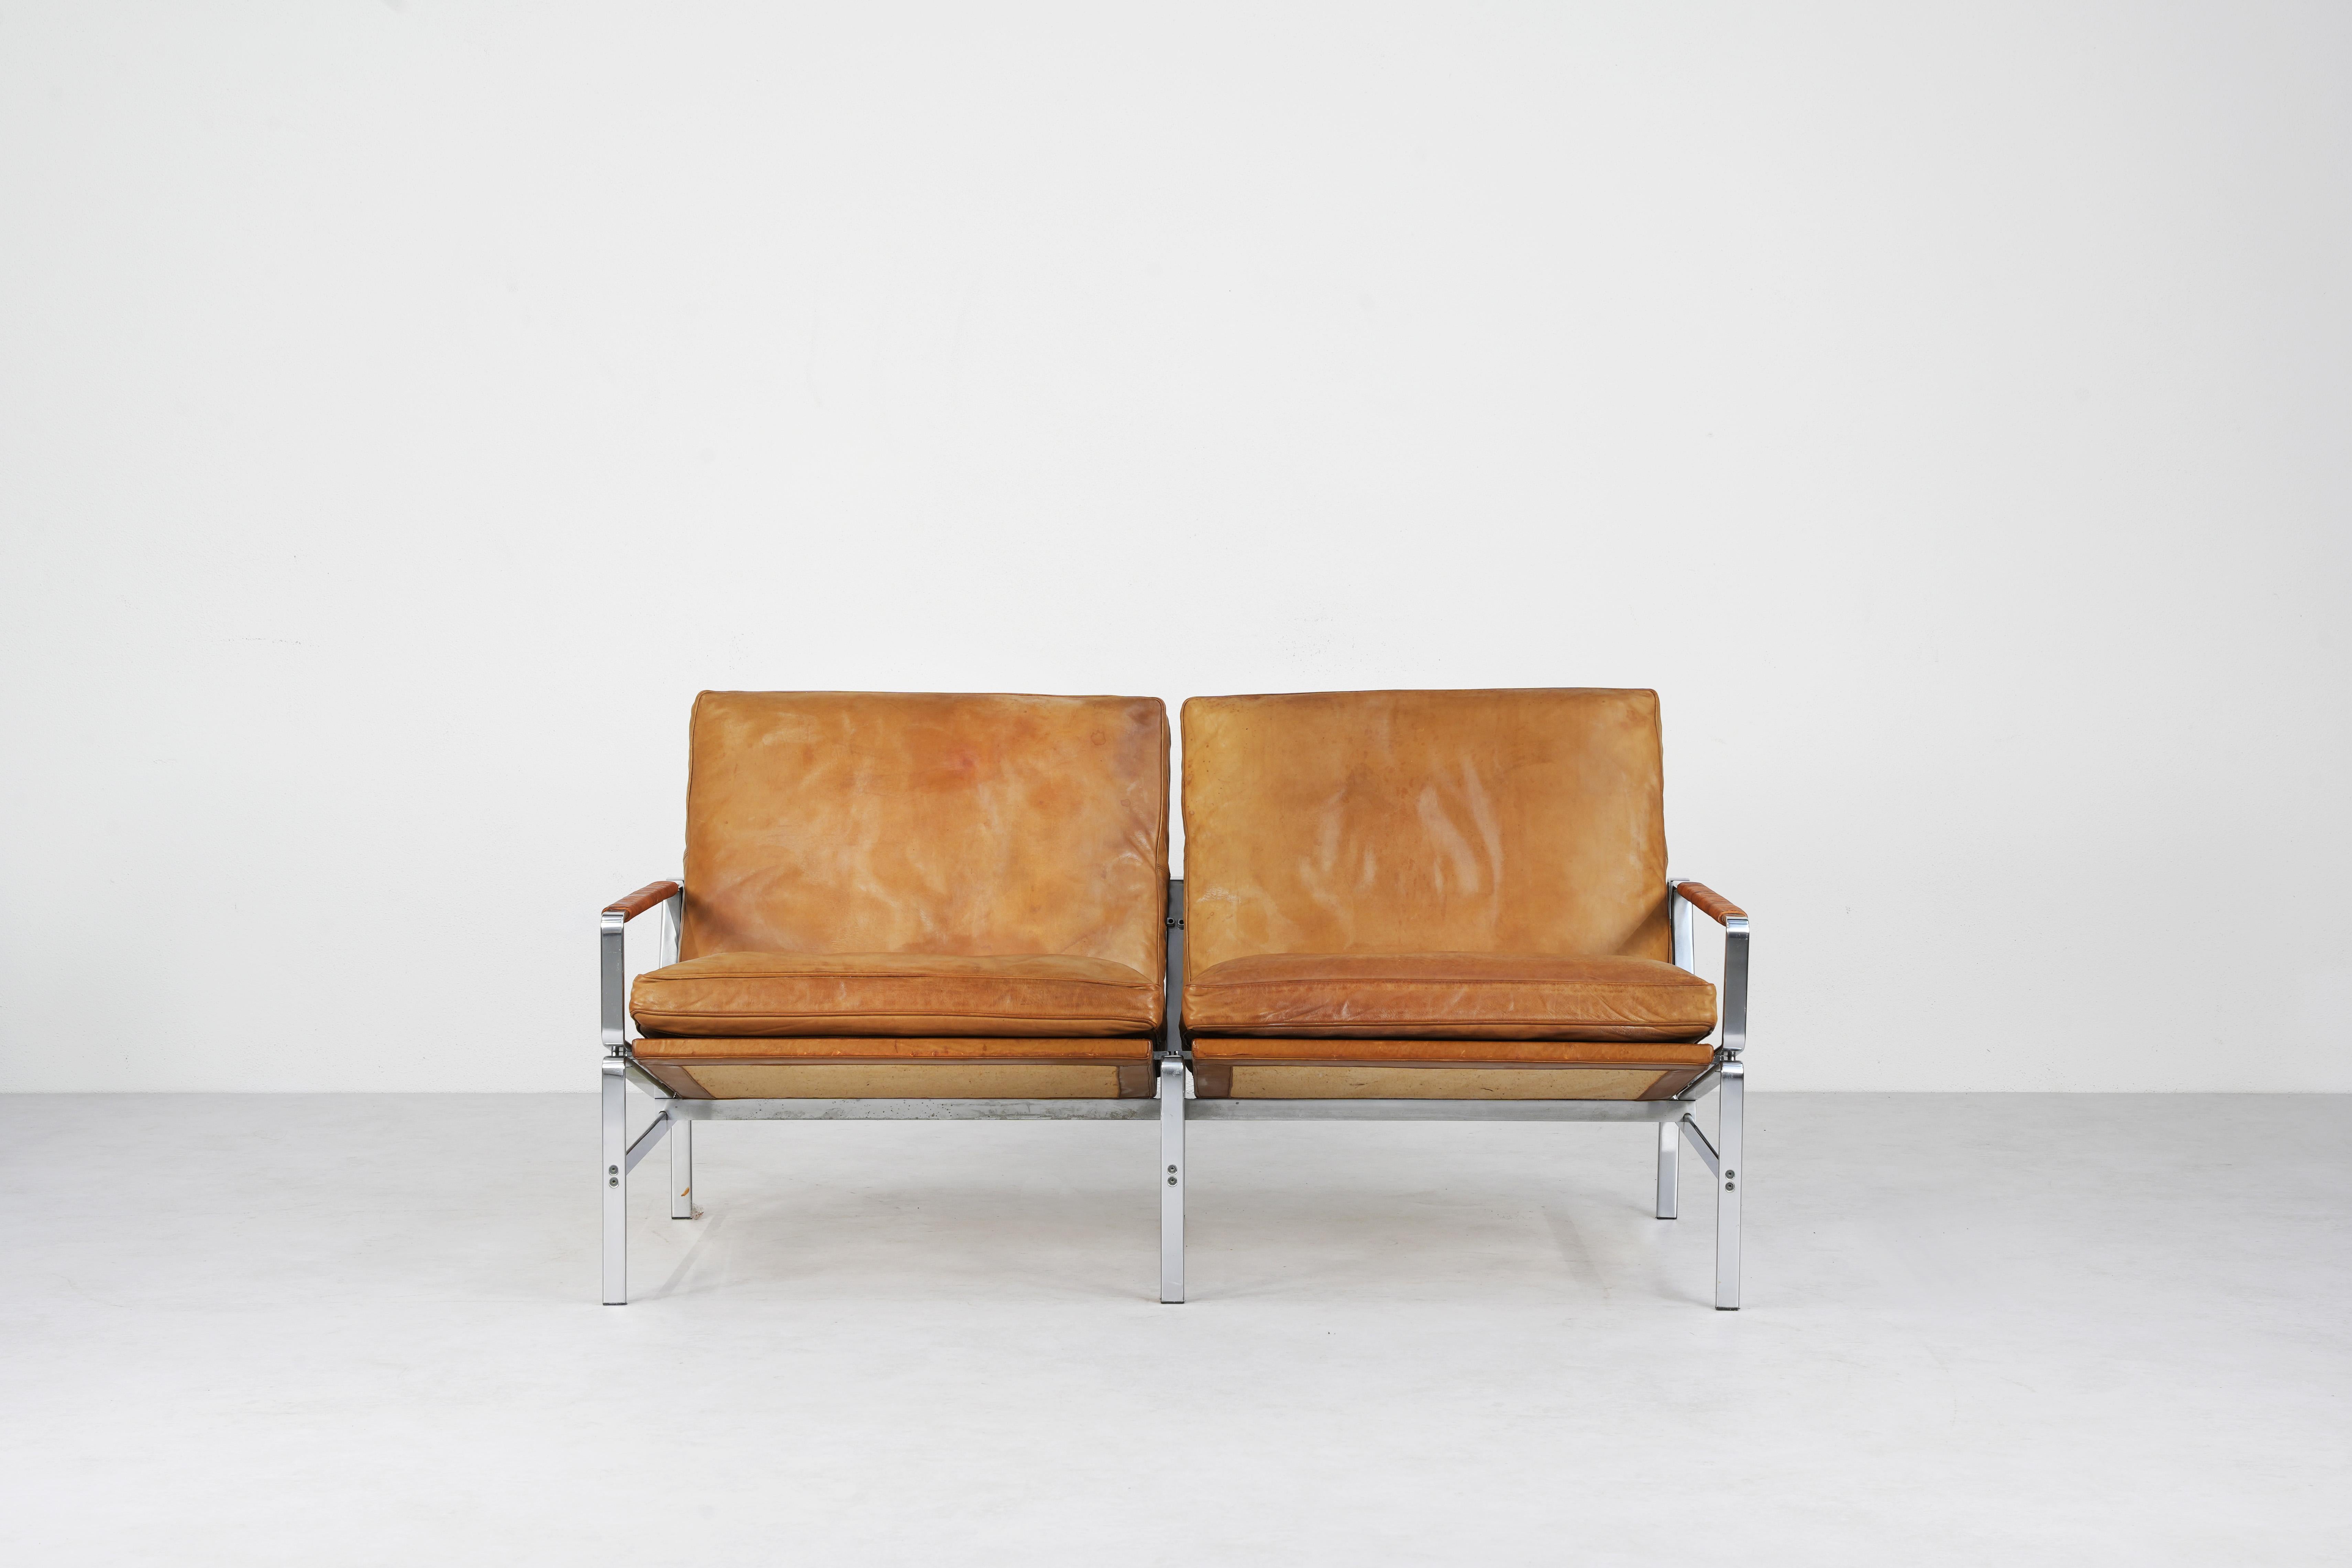 German Danish Two Seater Sofa 6720 by Fabricius & Kastholm for Kill International, 1968 For Sale